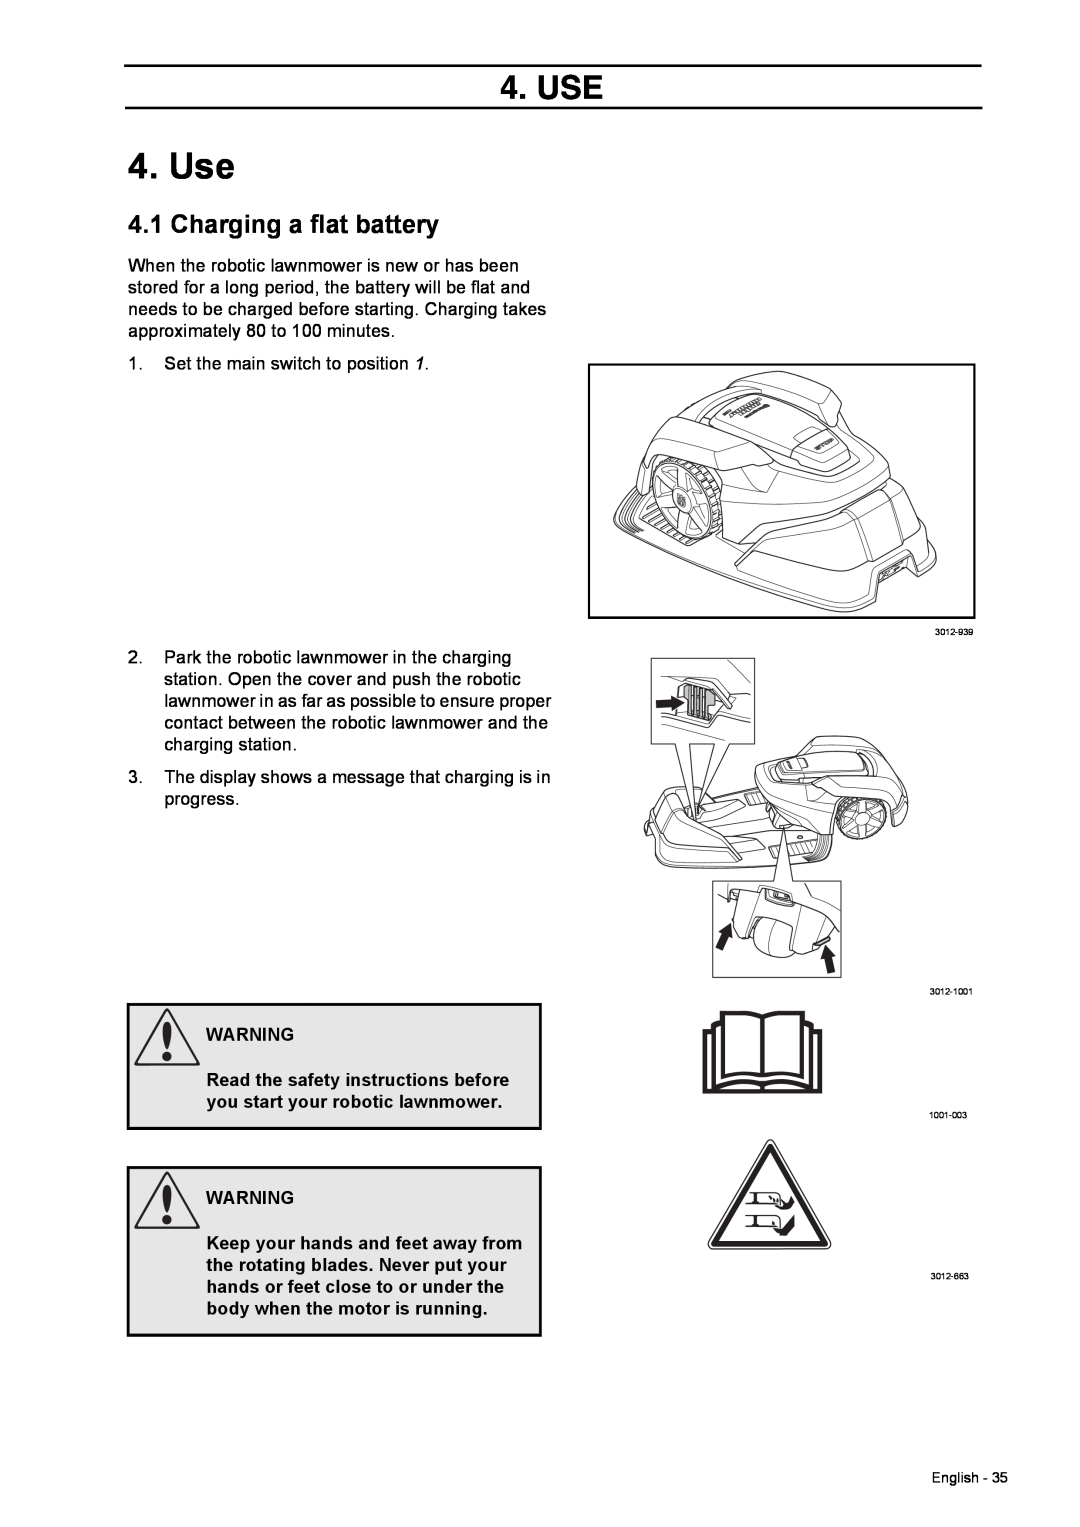 Husqvarna 308 manual Use, Charging a flat battery, Read the safety instructions before you start your robotic lawnmower 